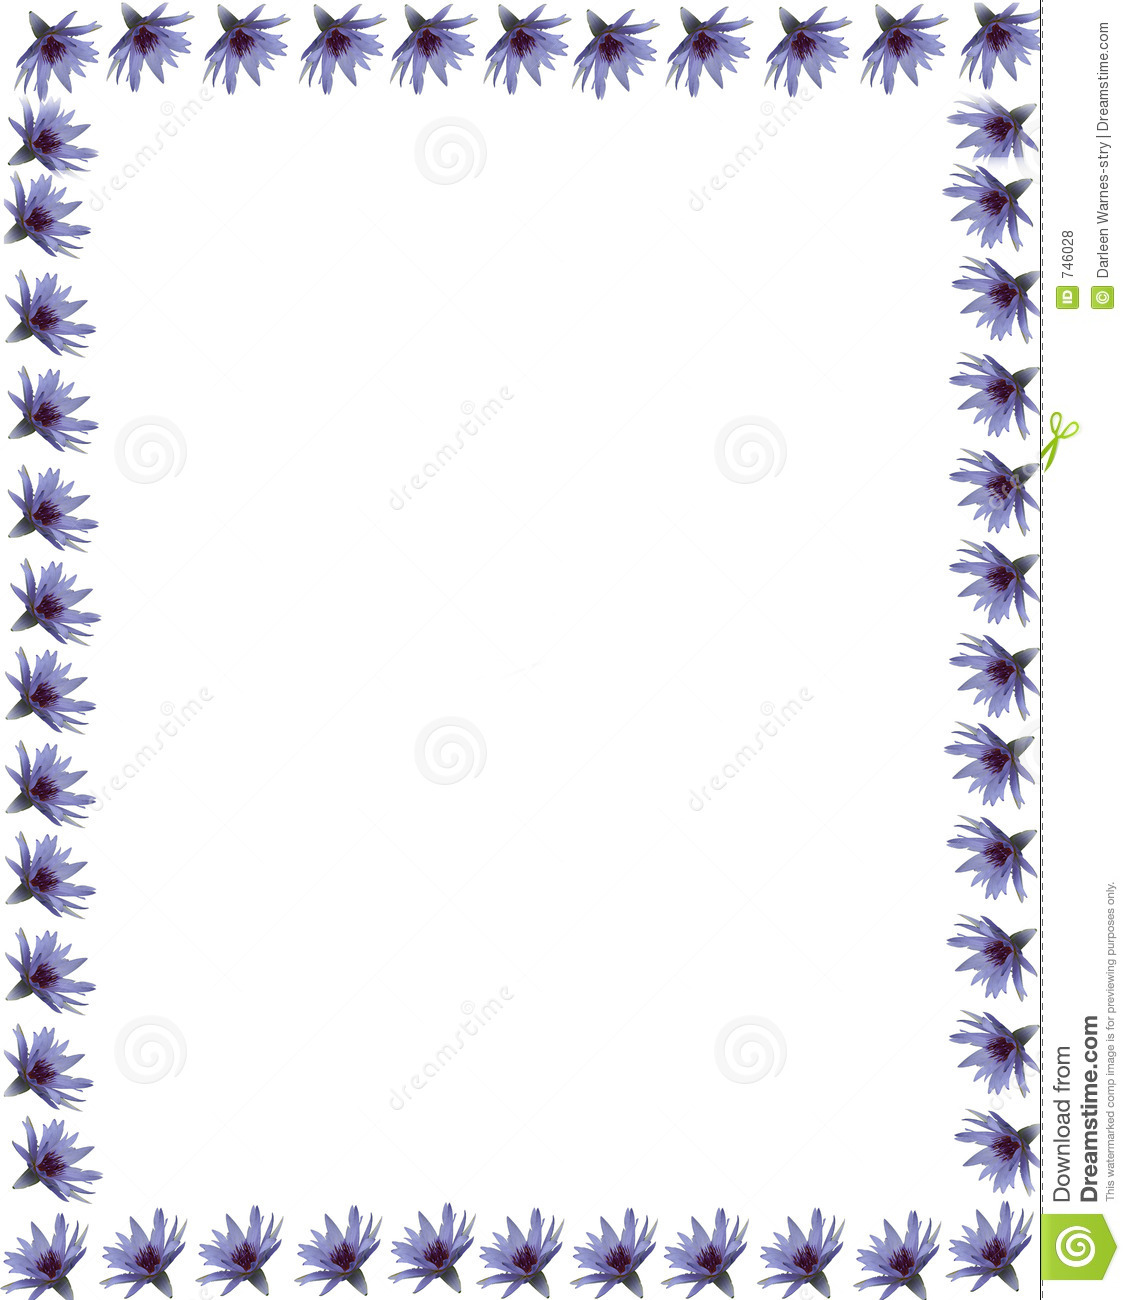 Purple Water Lily Pattern Around The Edges Creates The Border For